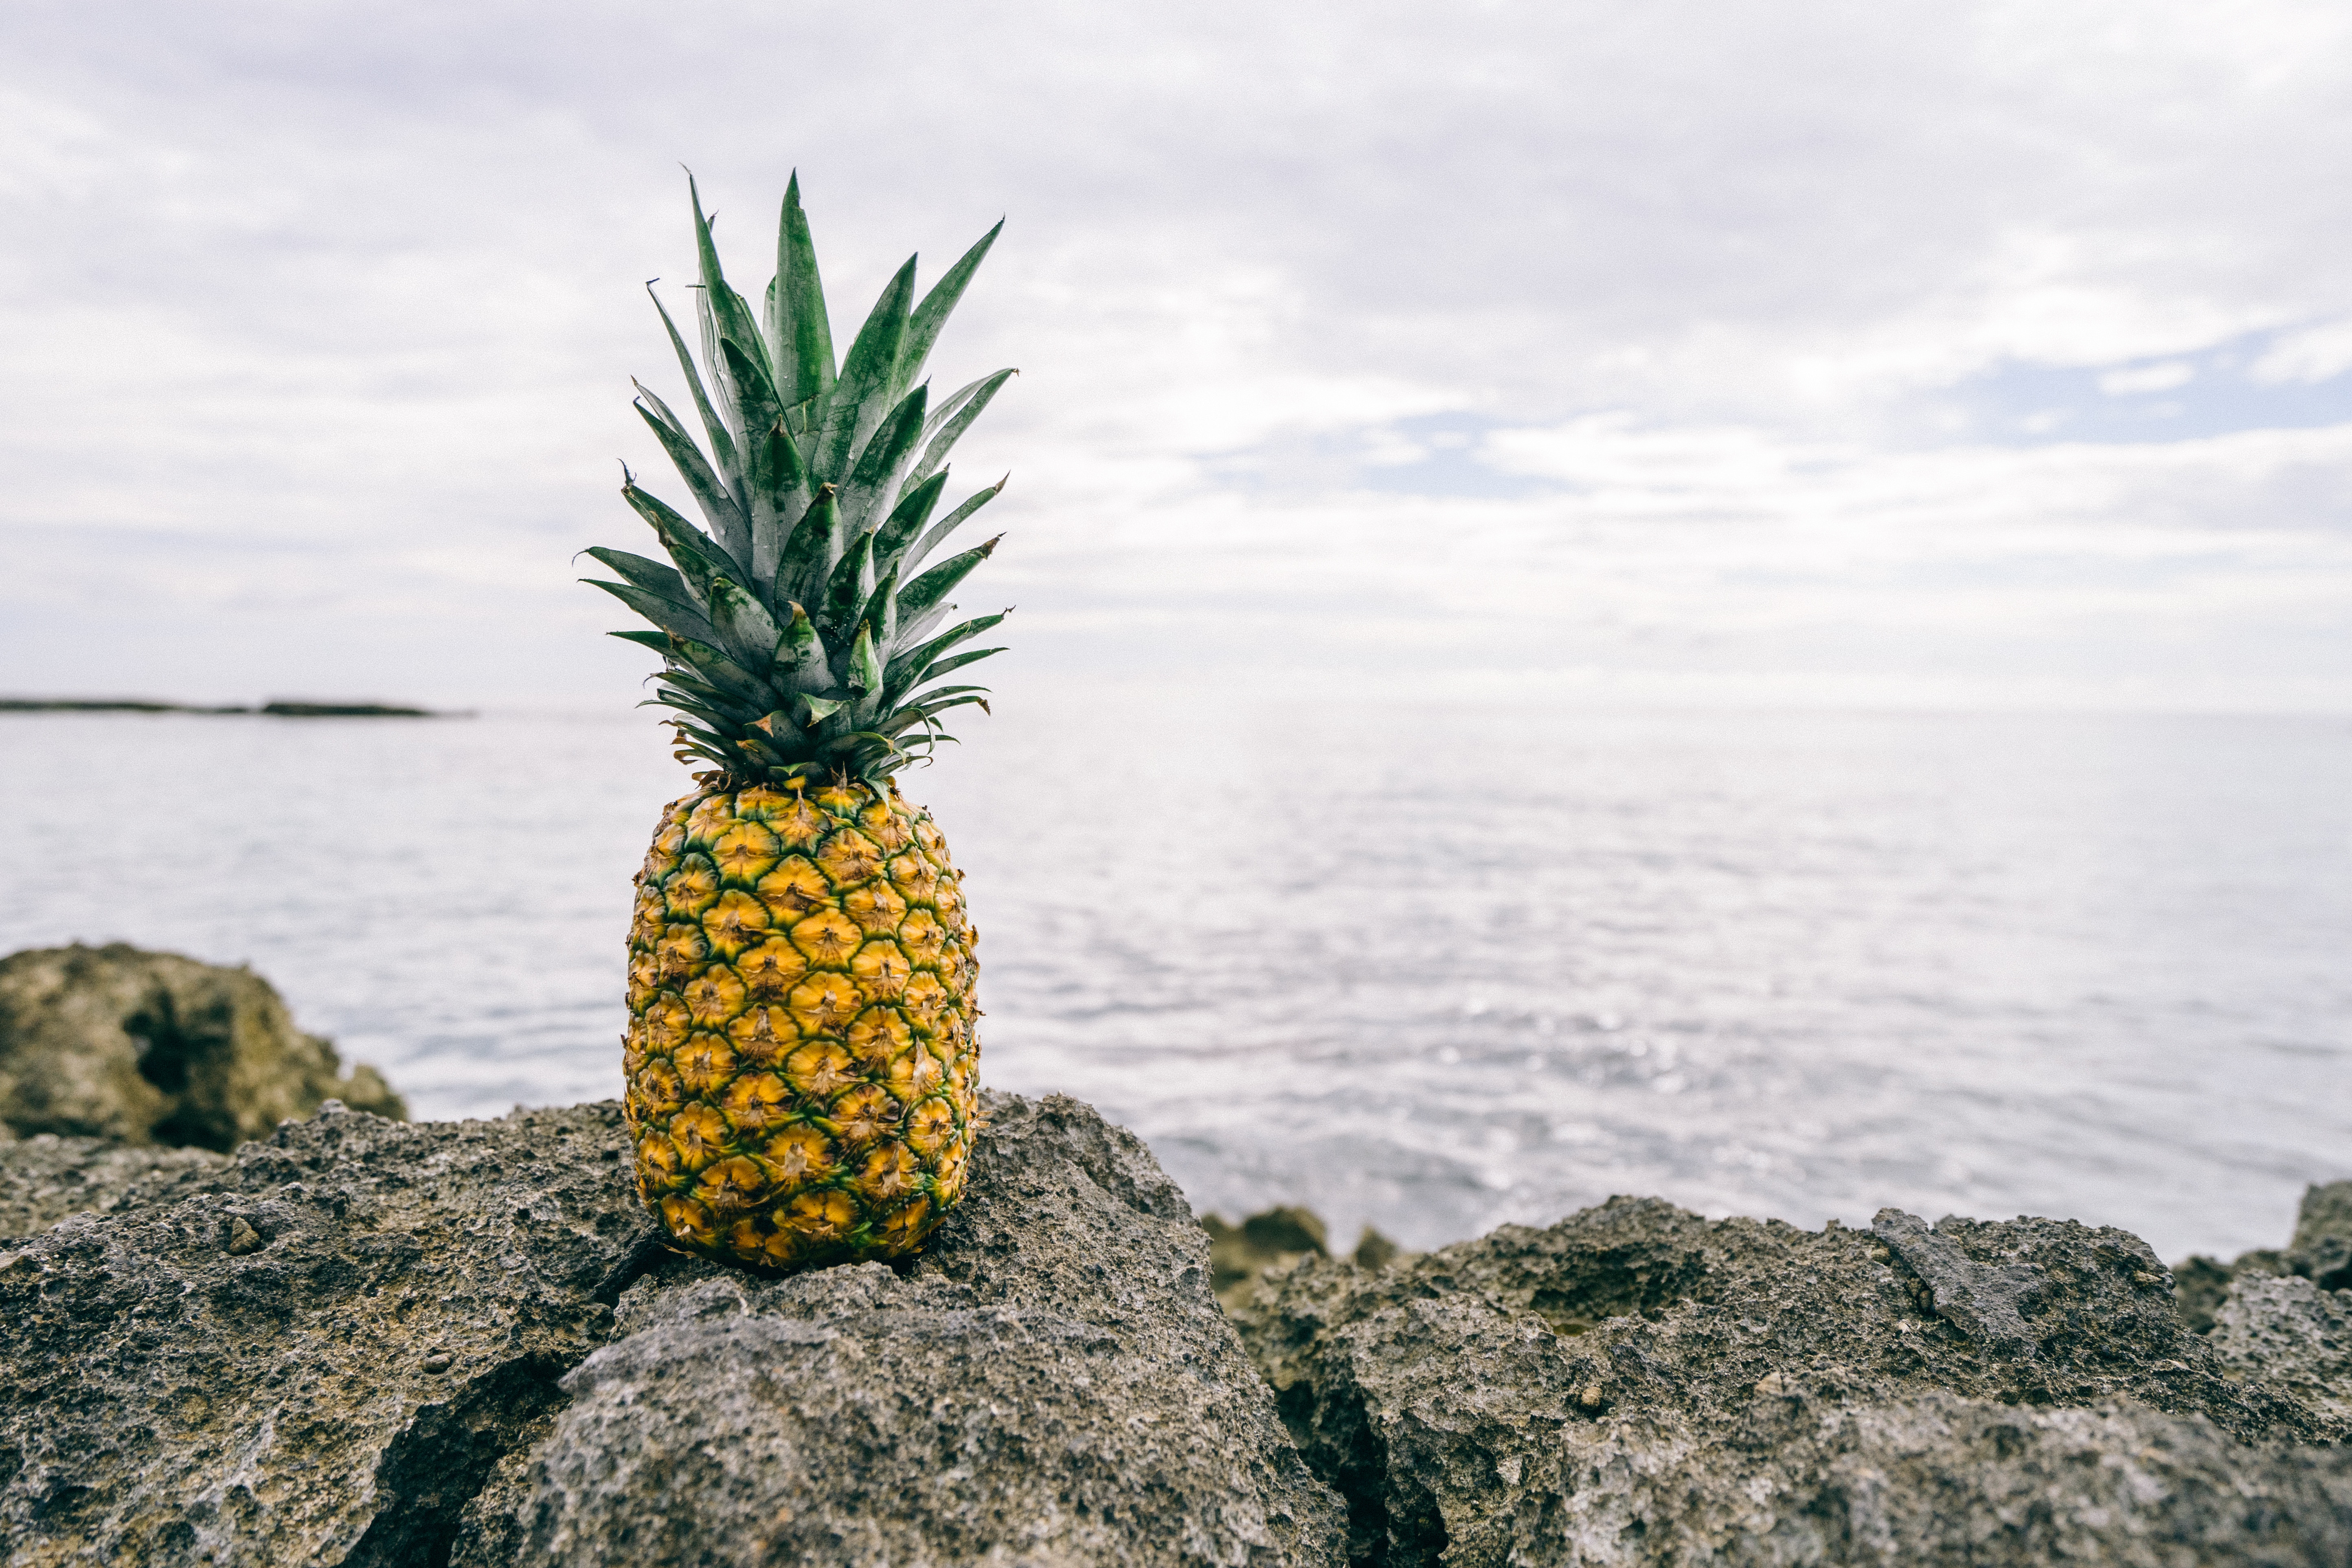 Pineapple Background